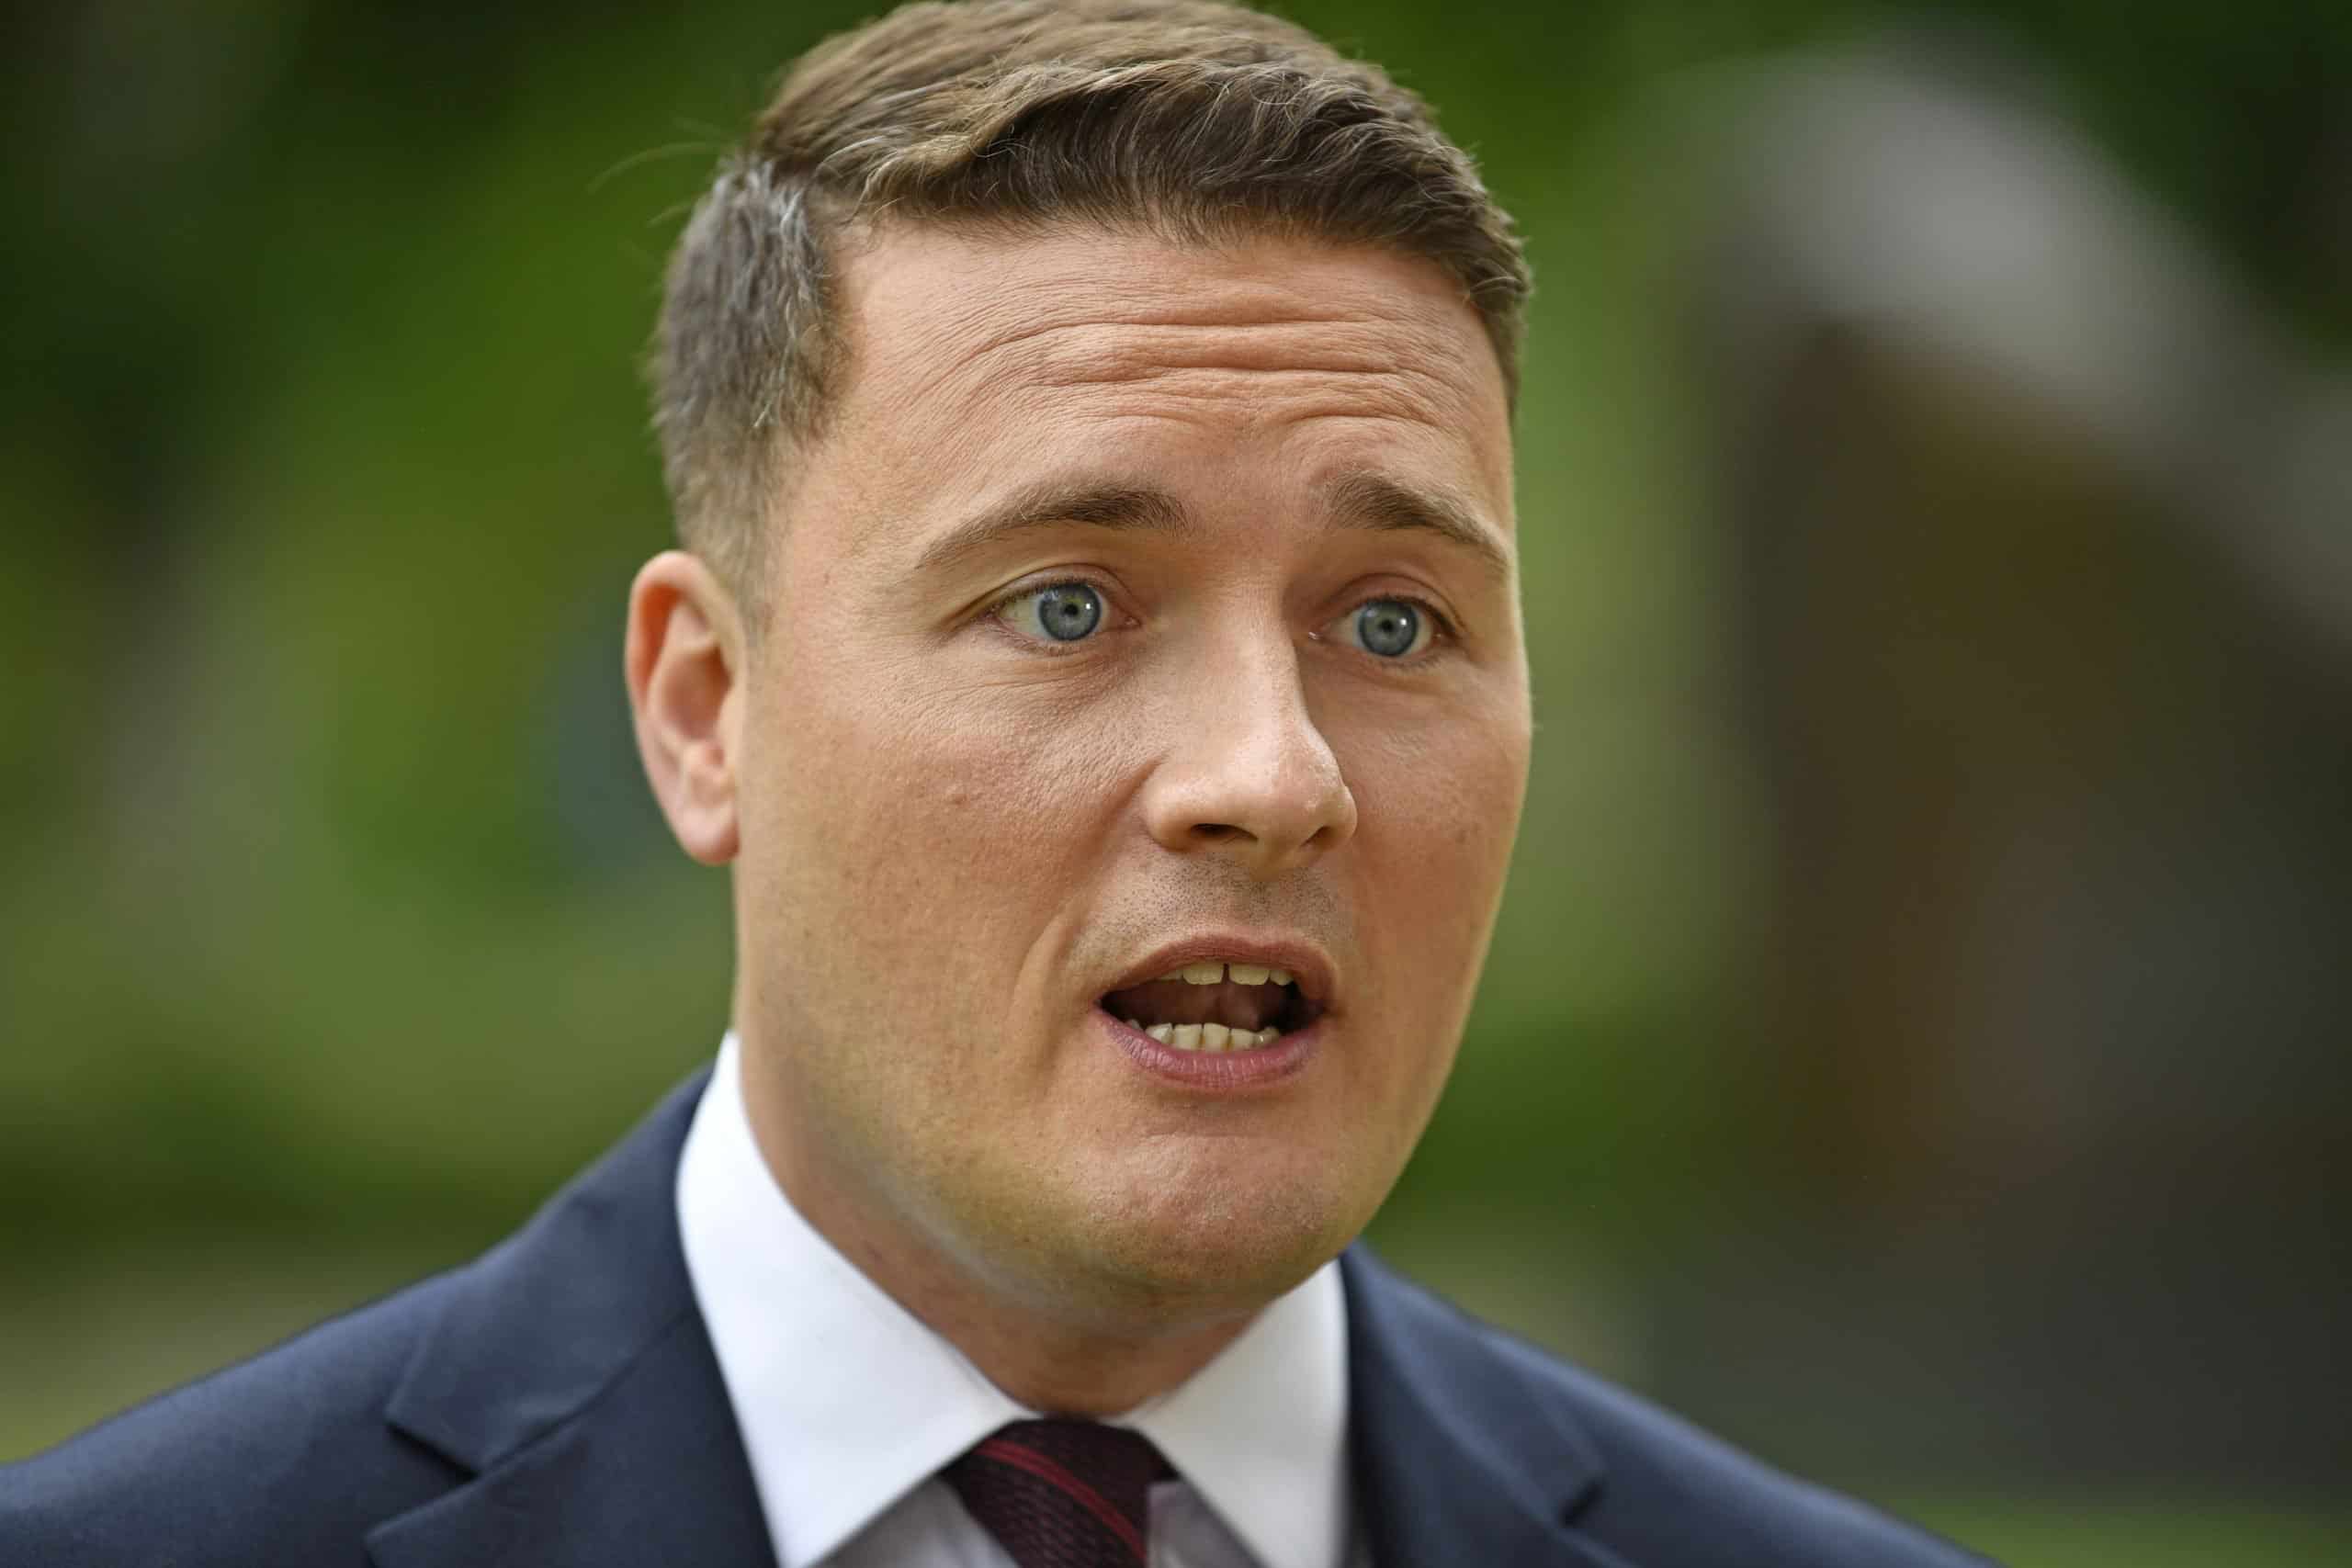 Wes Streeting says Sunak could be out ‘in six months’